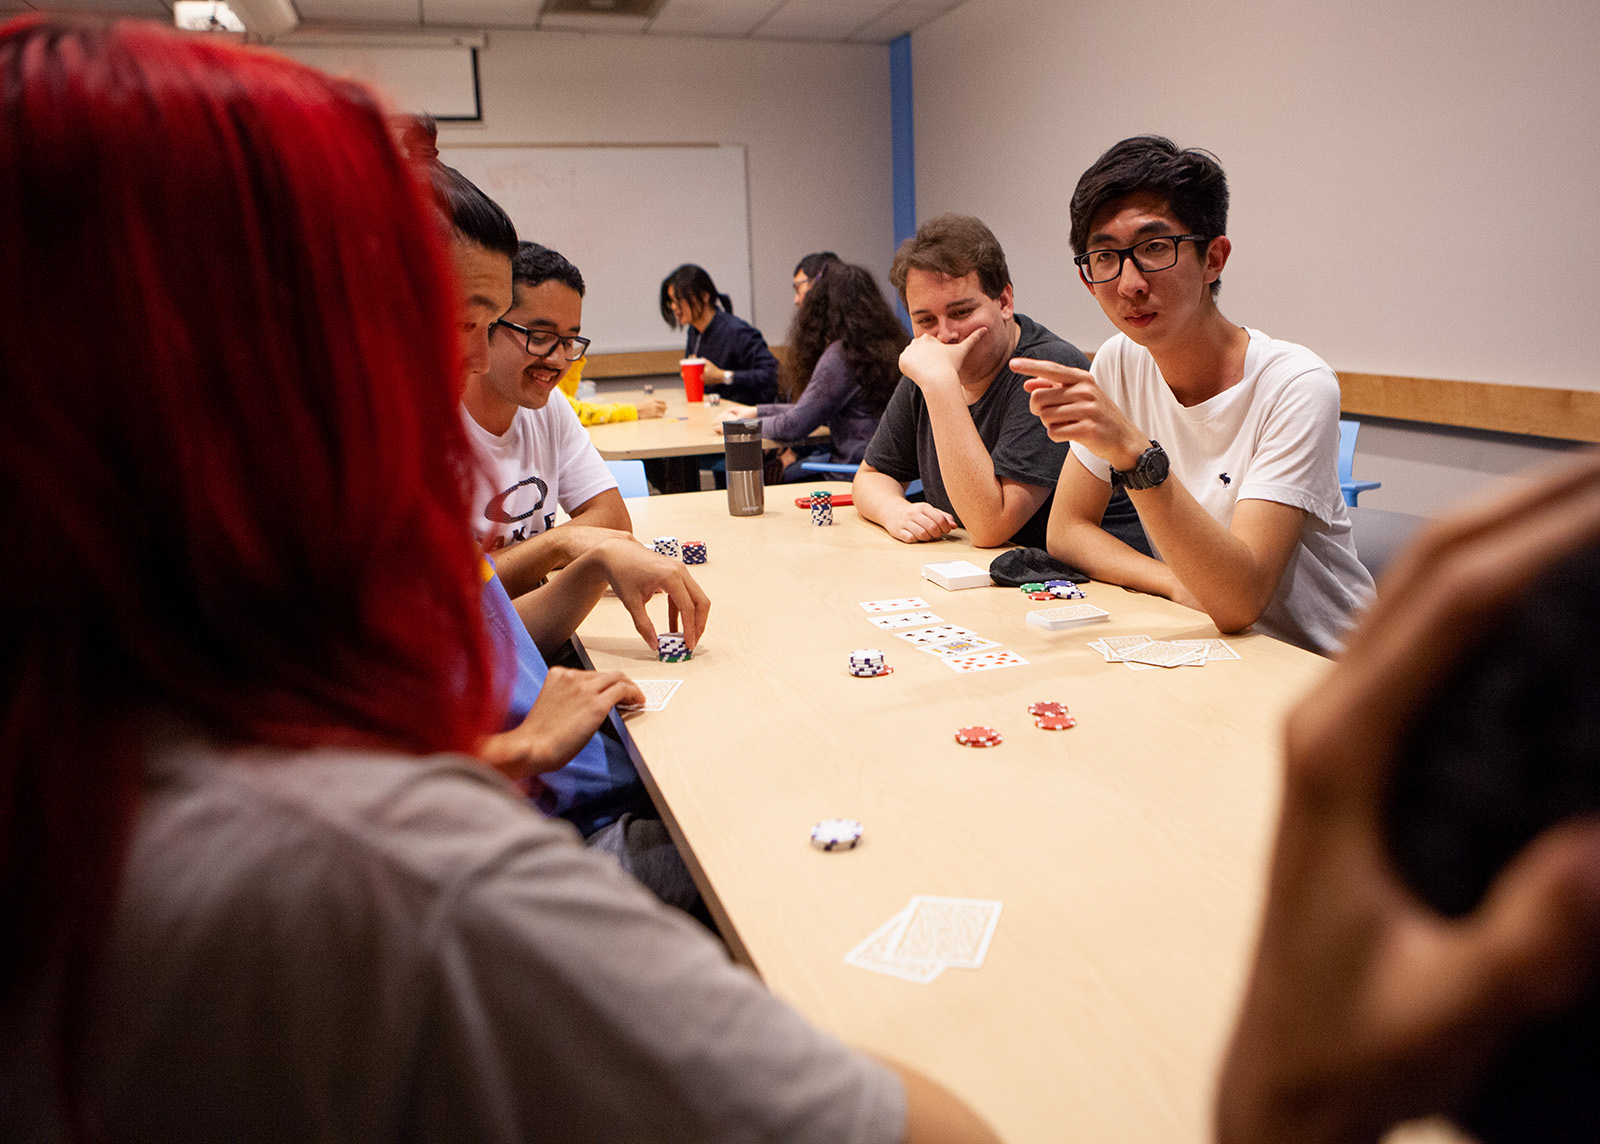 Enigma club members bond over RPGs, blackjack and campuswide games of  vampire tag - Daily Bruin